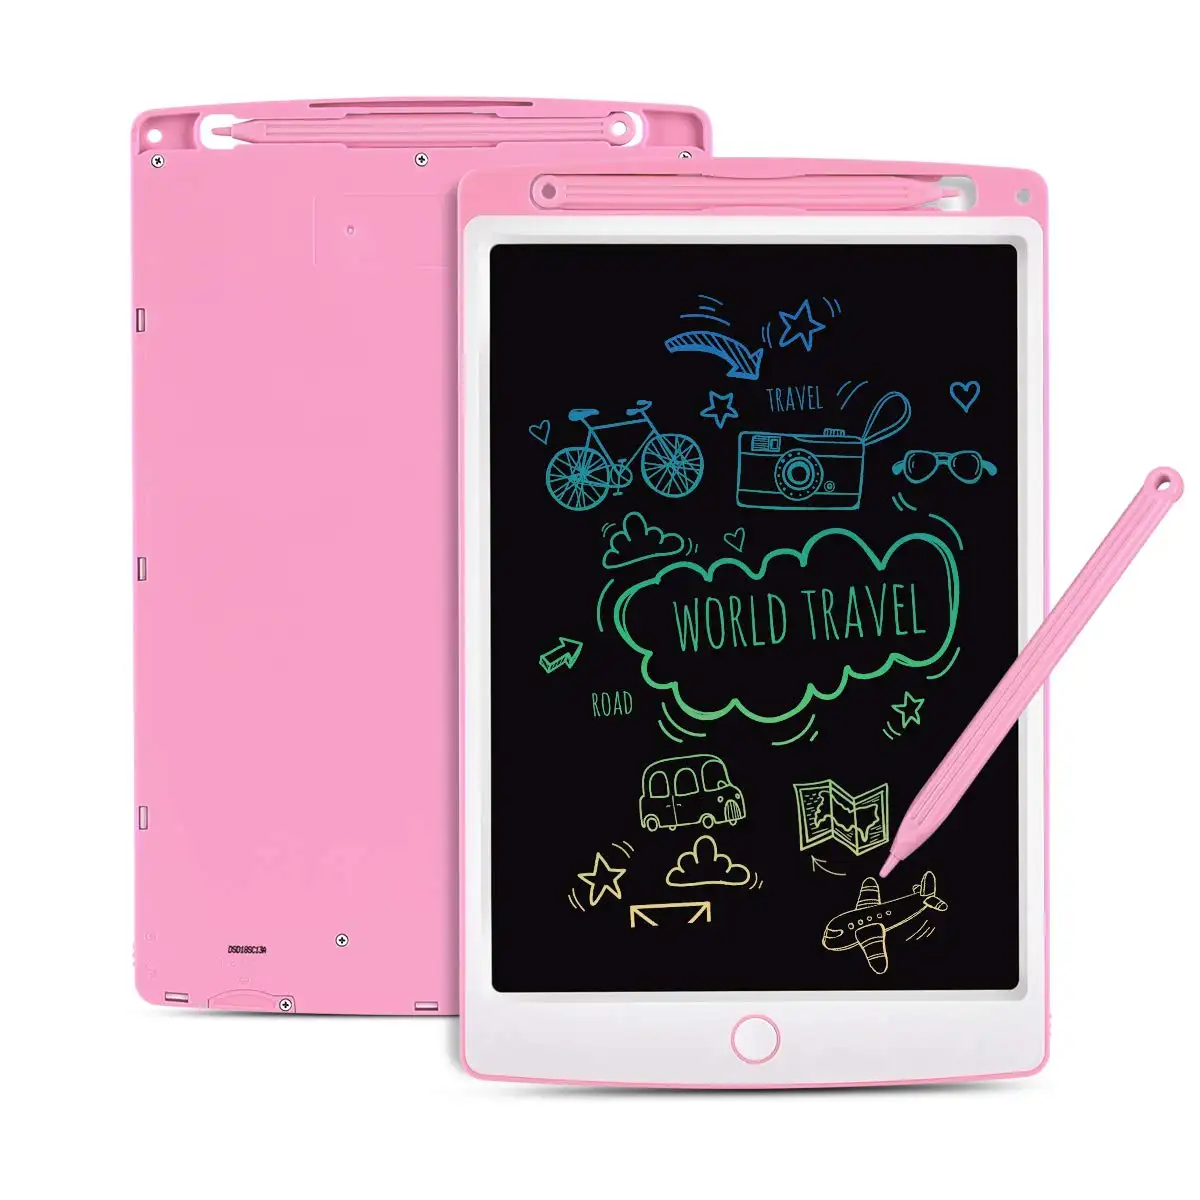 POLICRAL 10 inch Portable Mini Writing Board Handwriting Doodle Pad Drawing Tablet Memo Notebook for Kids